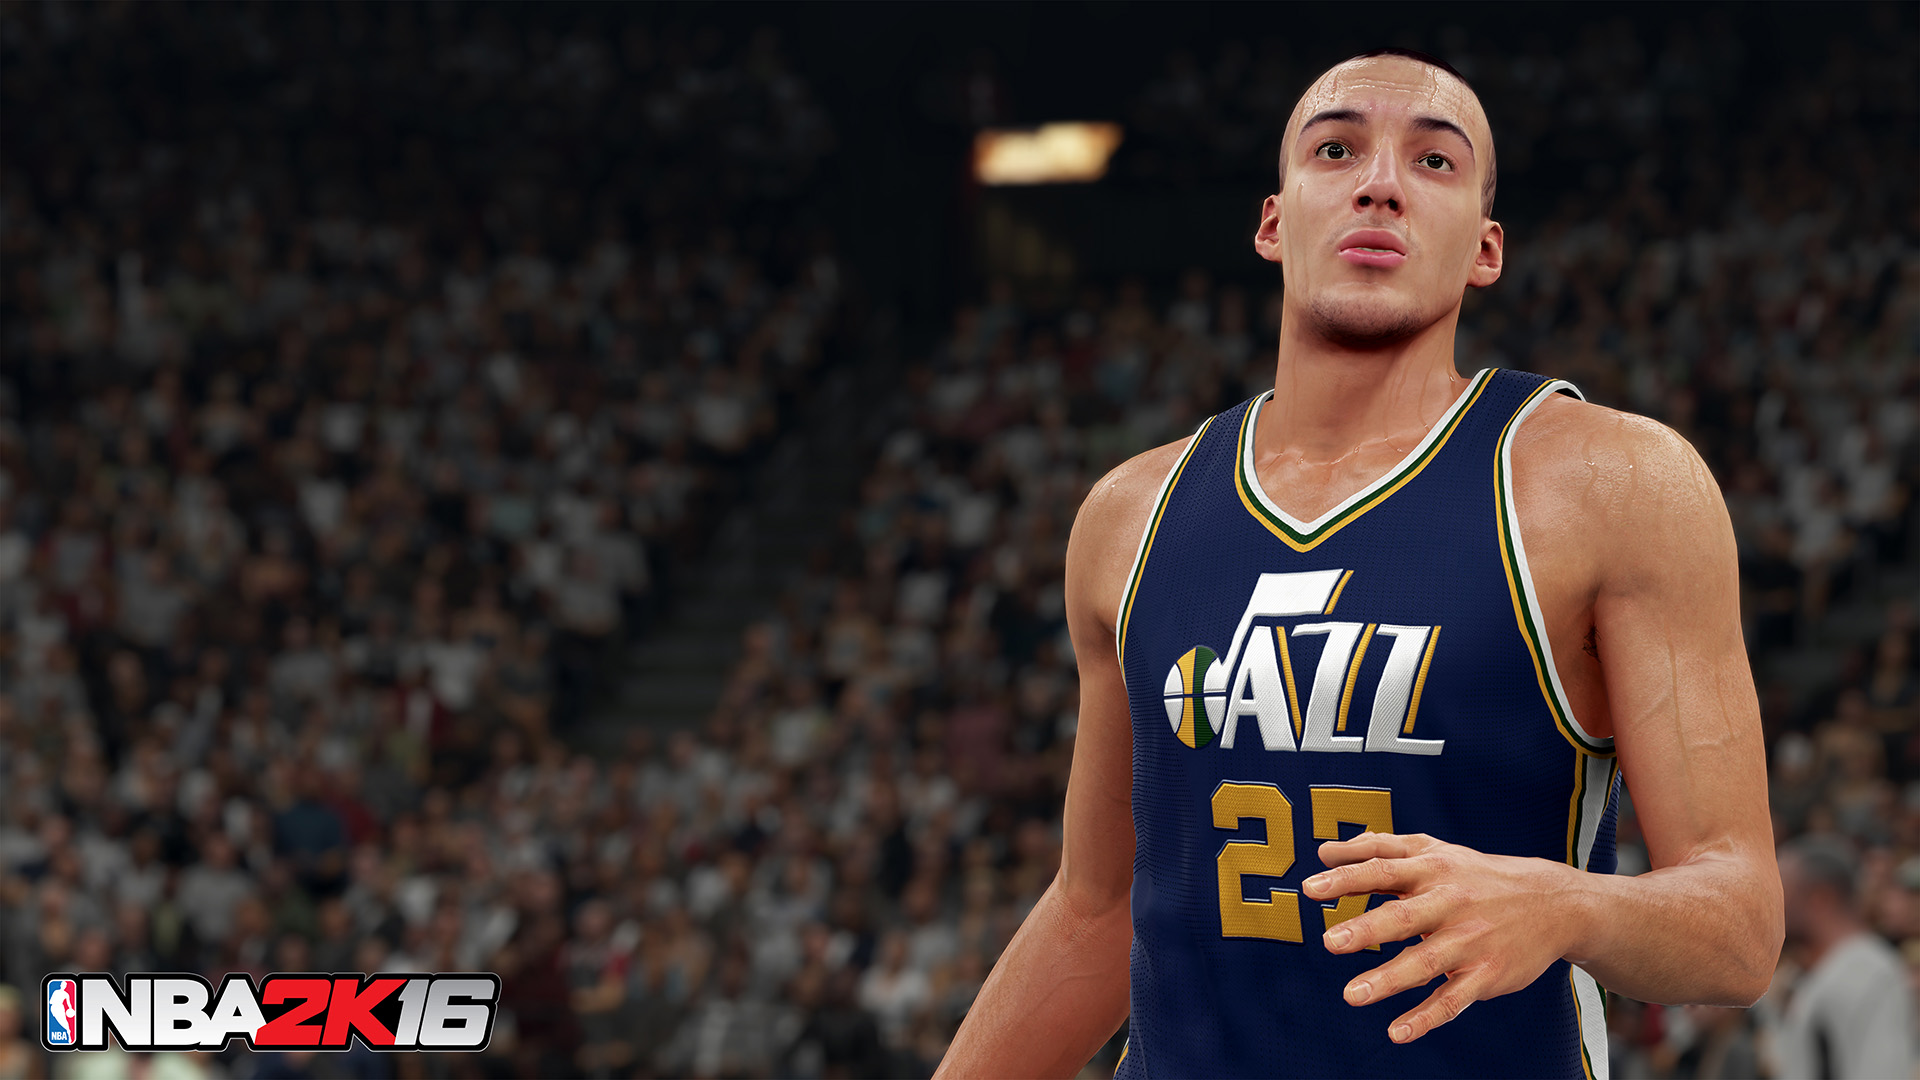 NBA 2K16 System Requirements